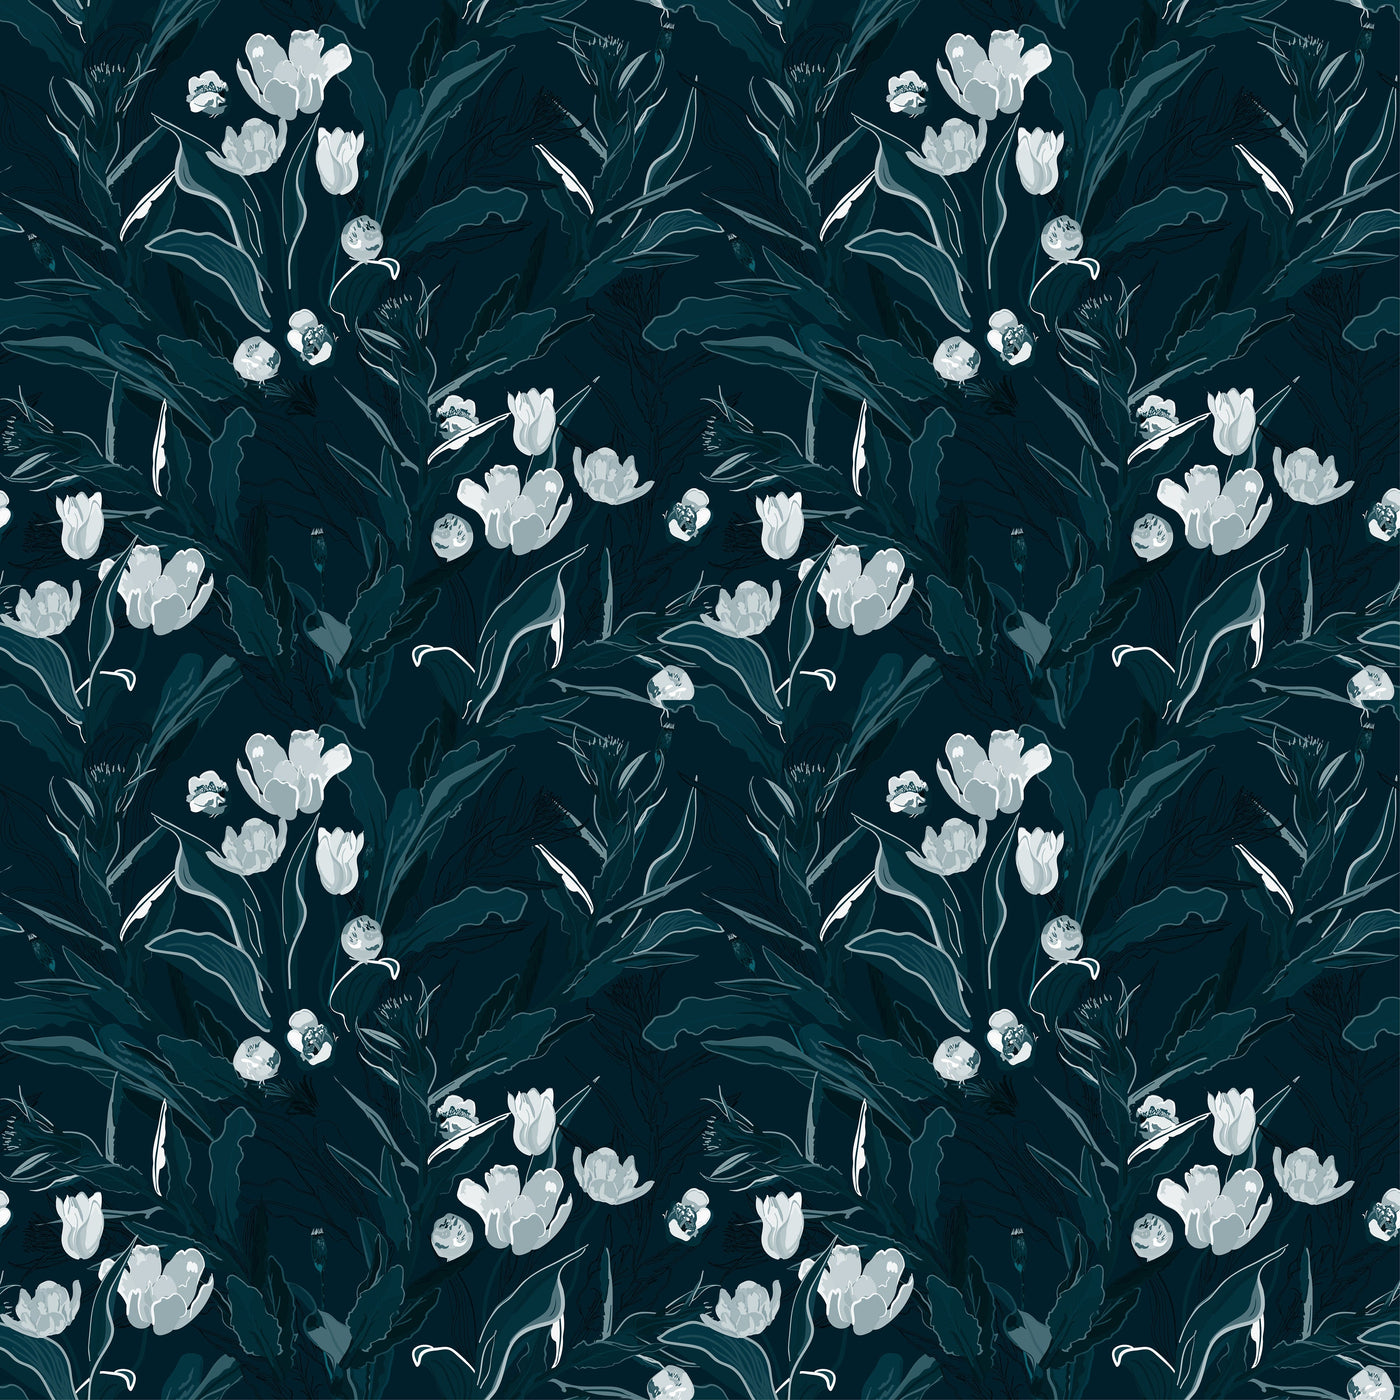 Dark Navy Floral Wallpaper | Removable Wallpaper | Peel And Stick ...